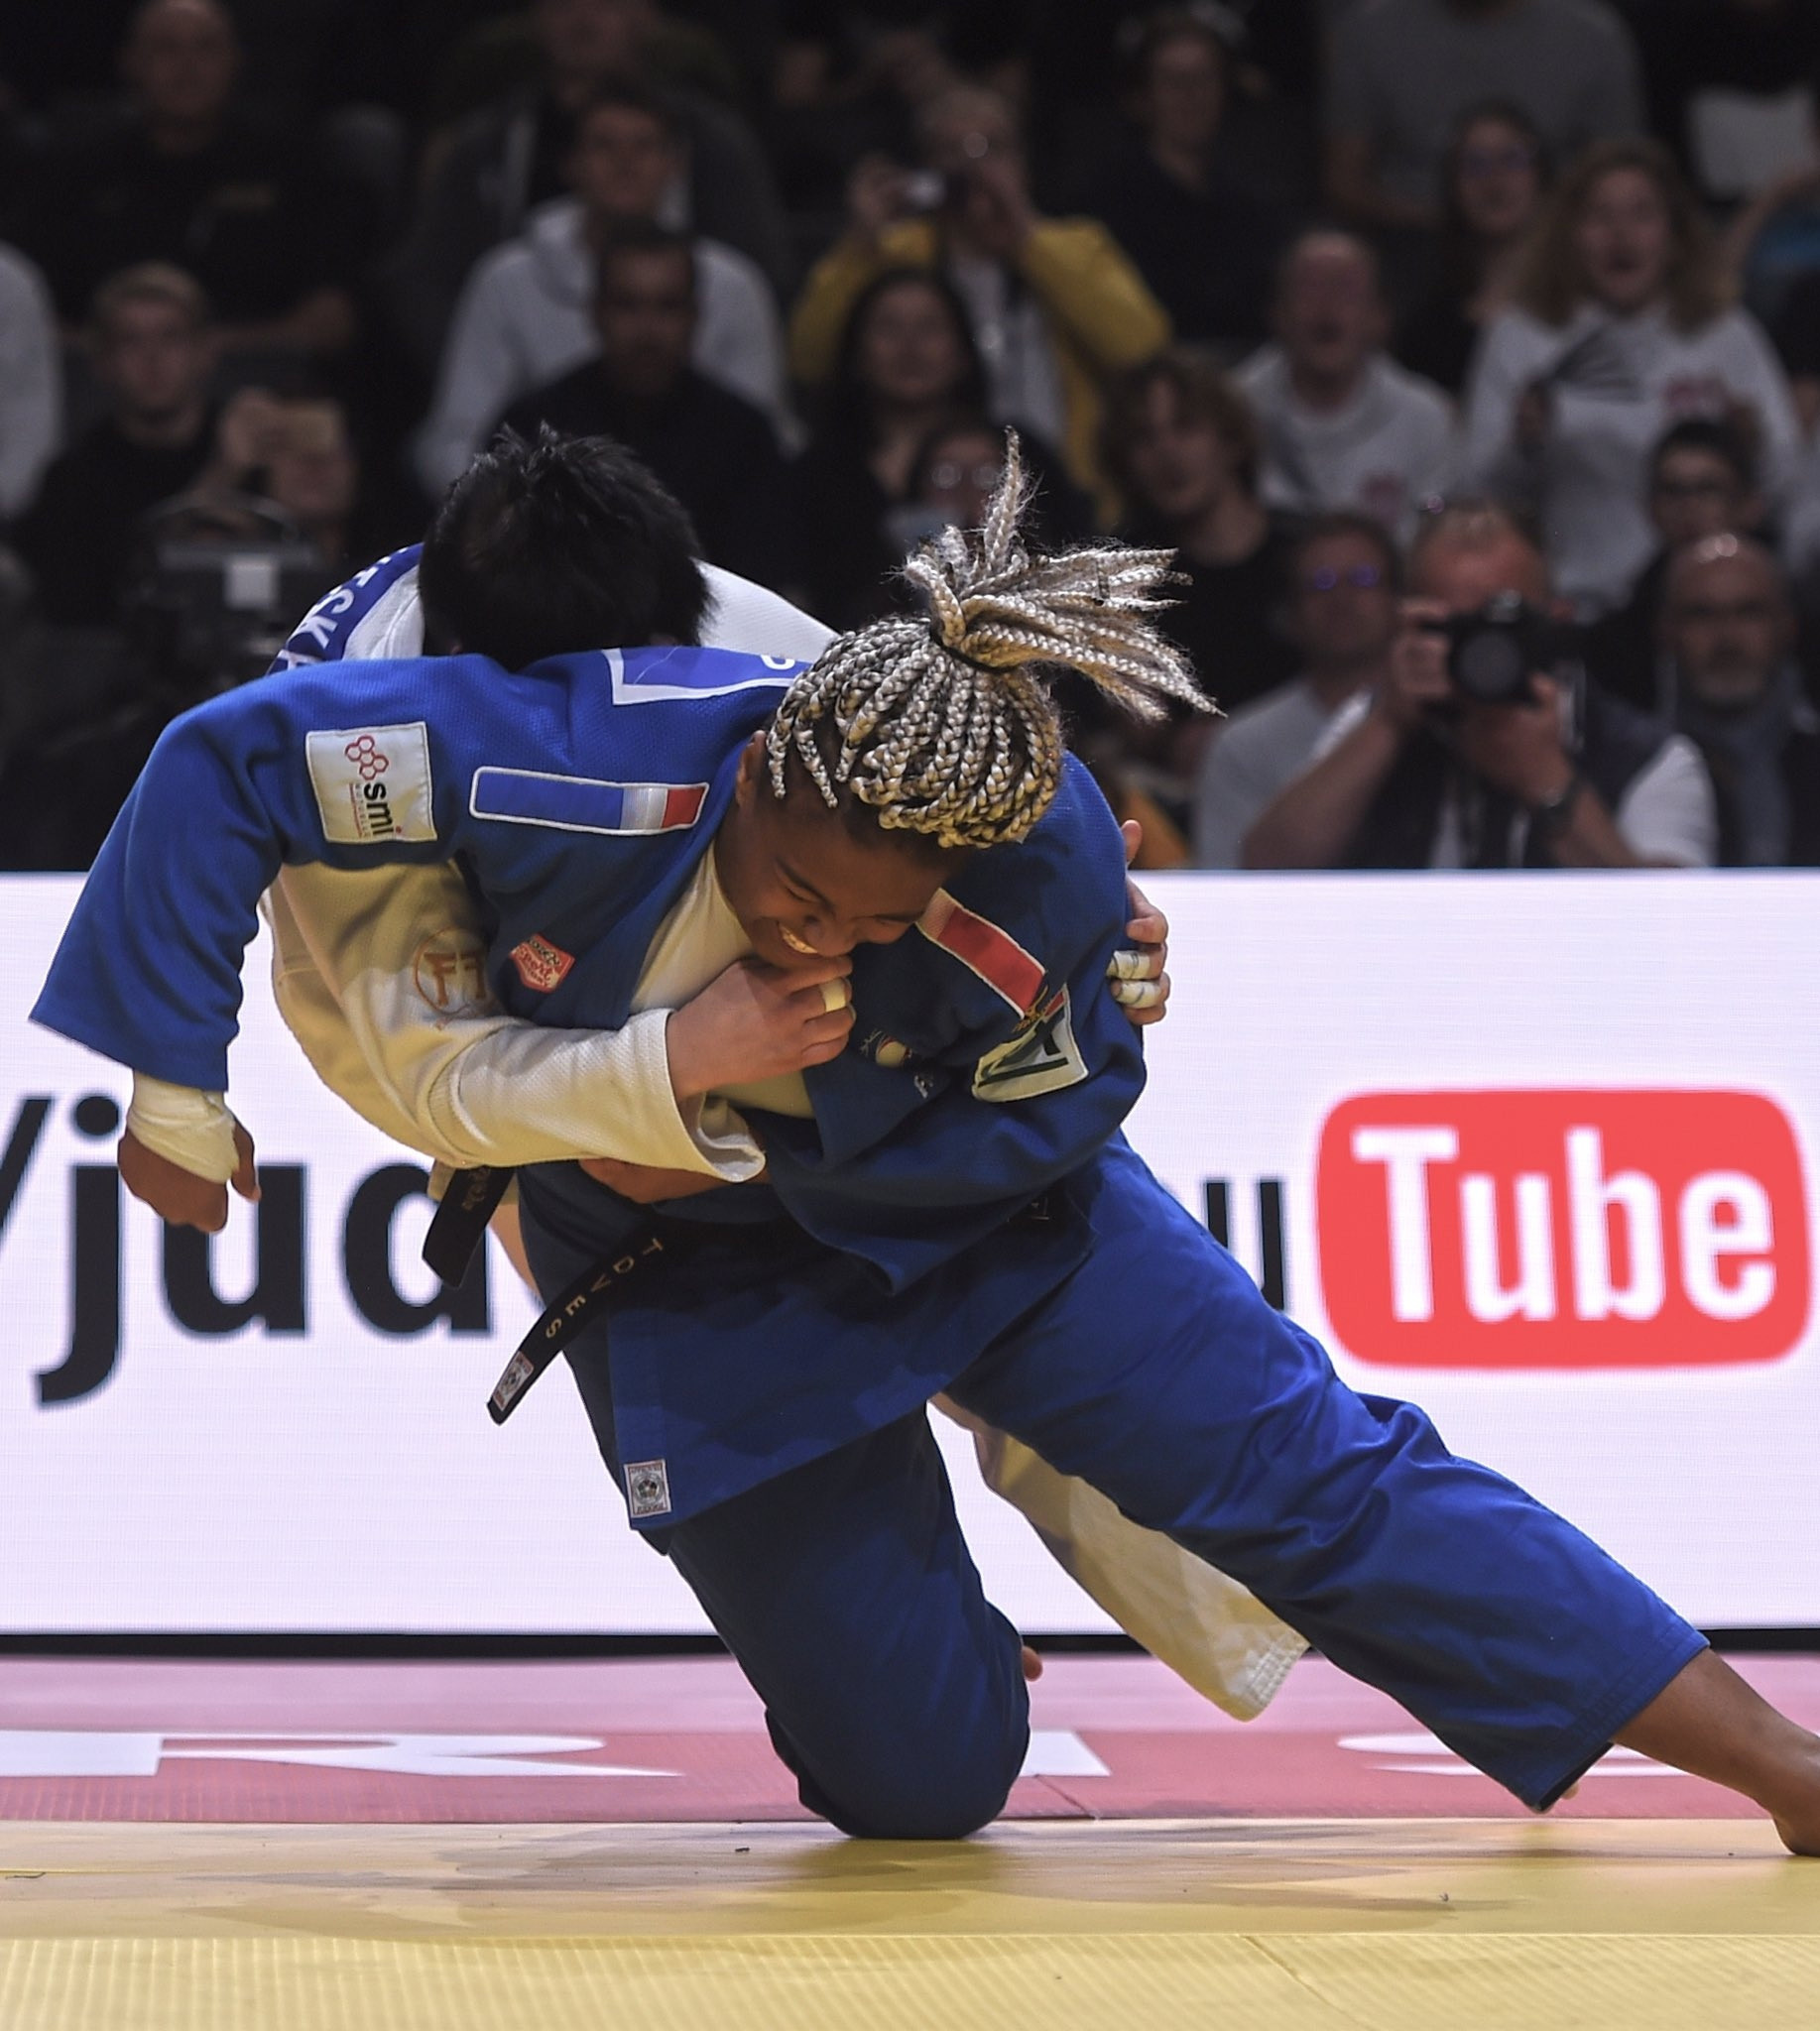 Romana Dicko, at 20 a new emerging French star, delighted the capacity 14,000 crowd at the AccorHotels Arena with an impressive victory over Belarus' Maryna Slutskaya in the over-78kg ©IJF